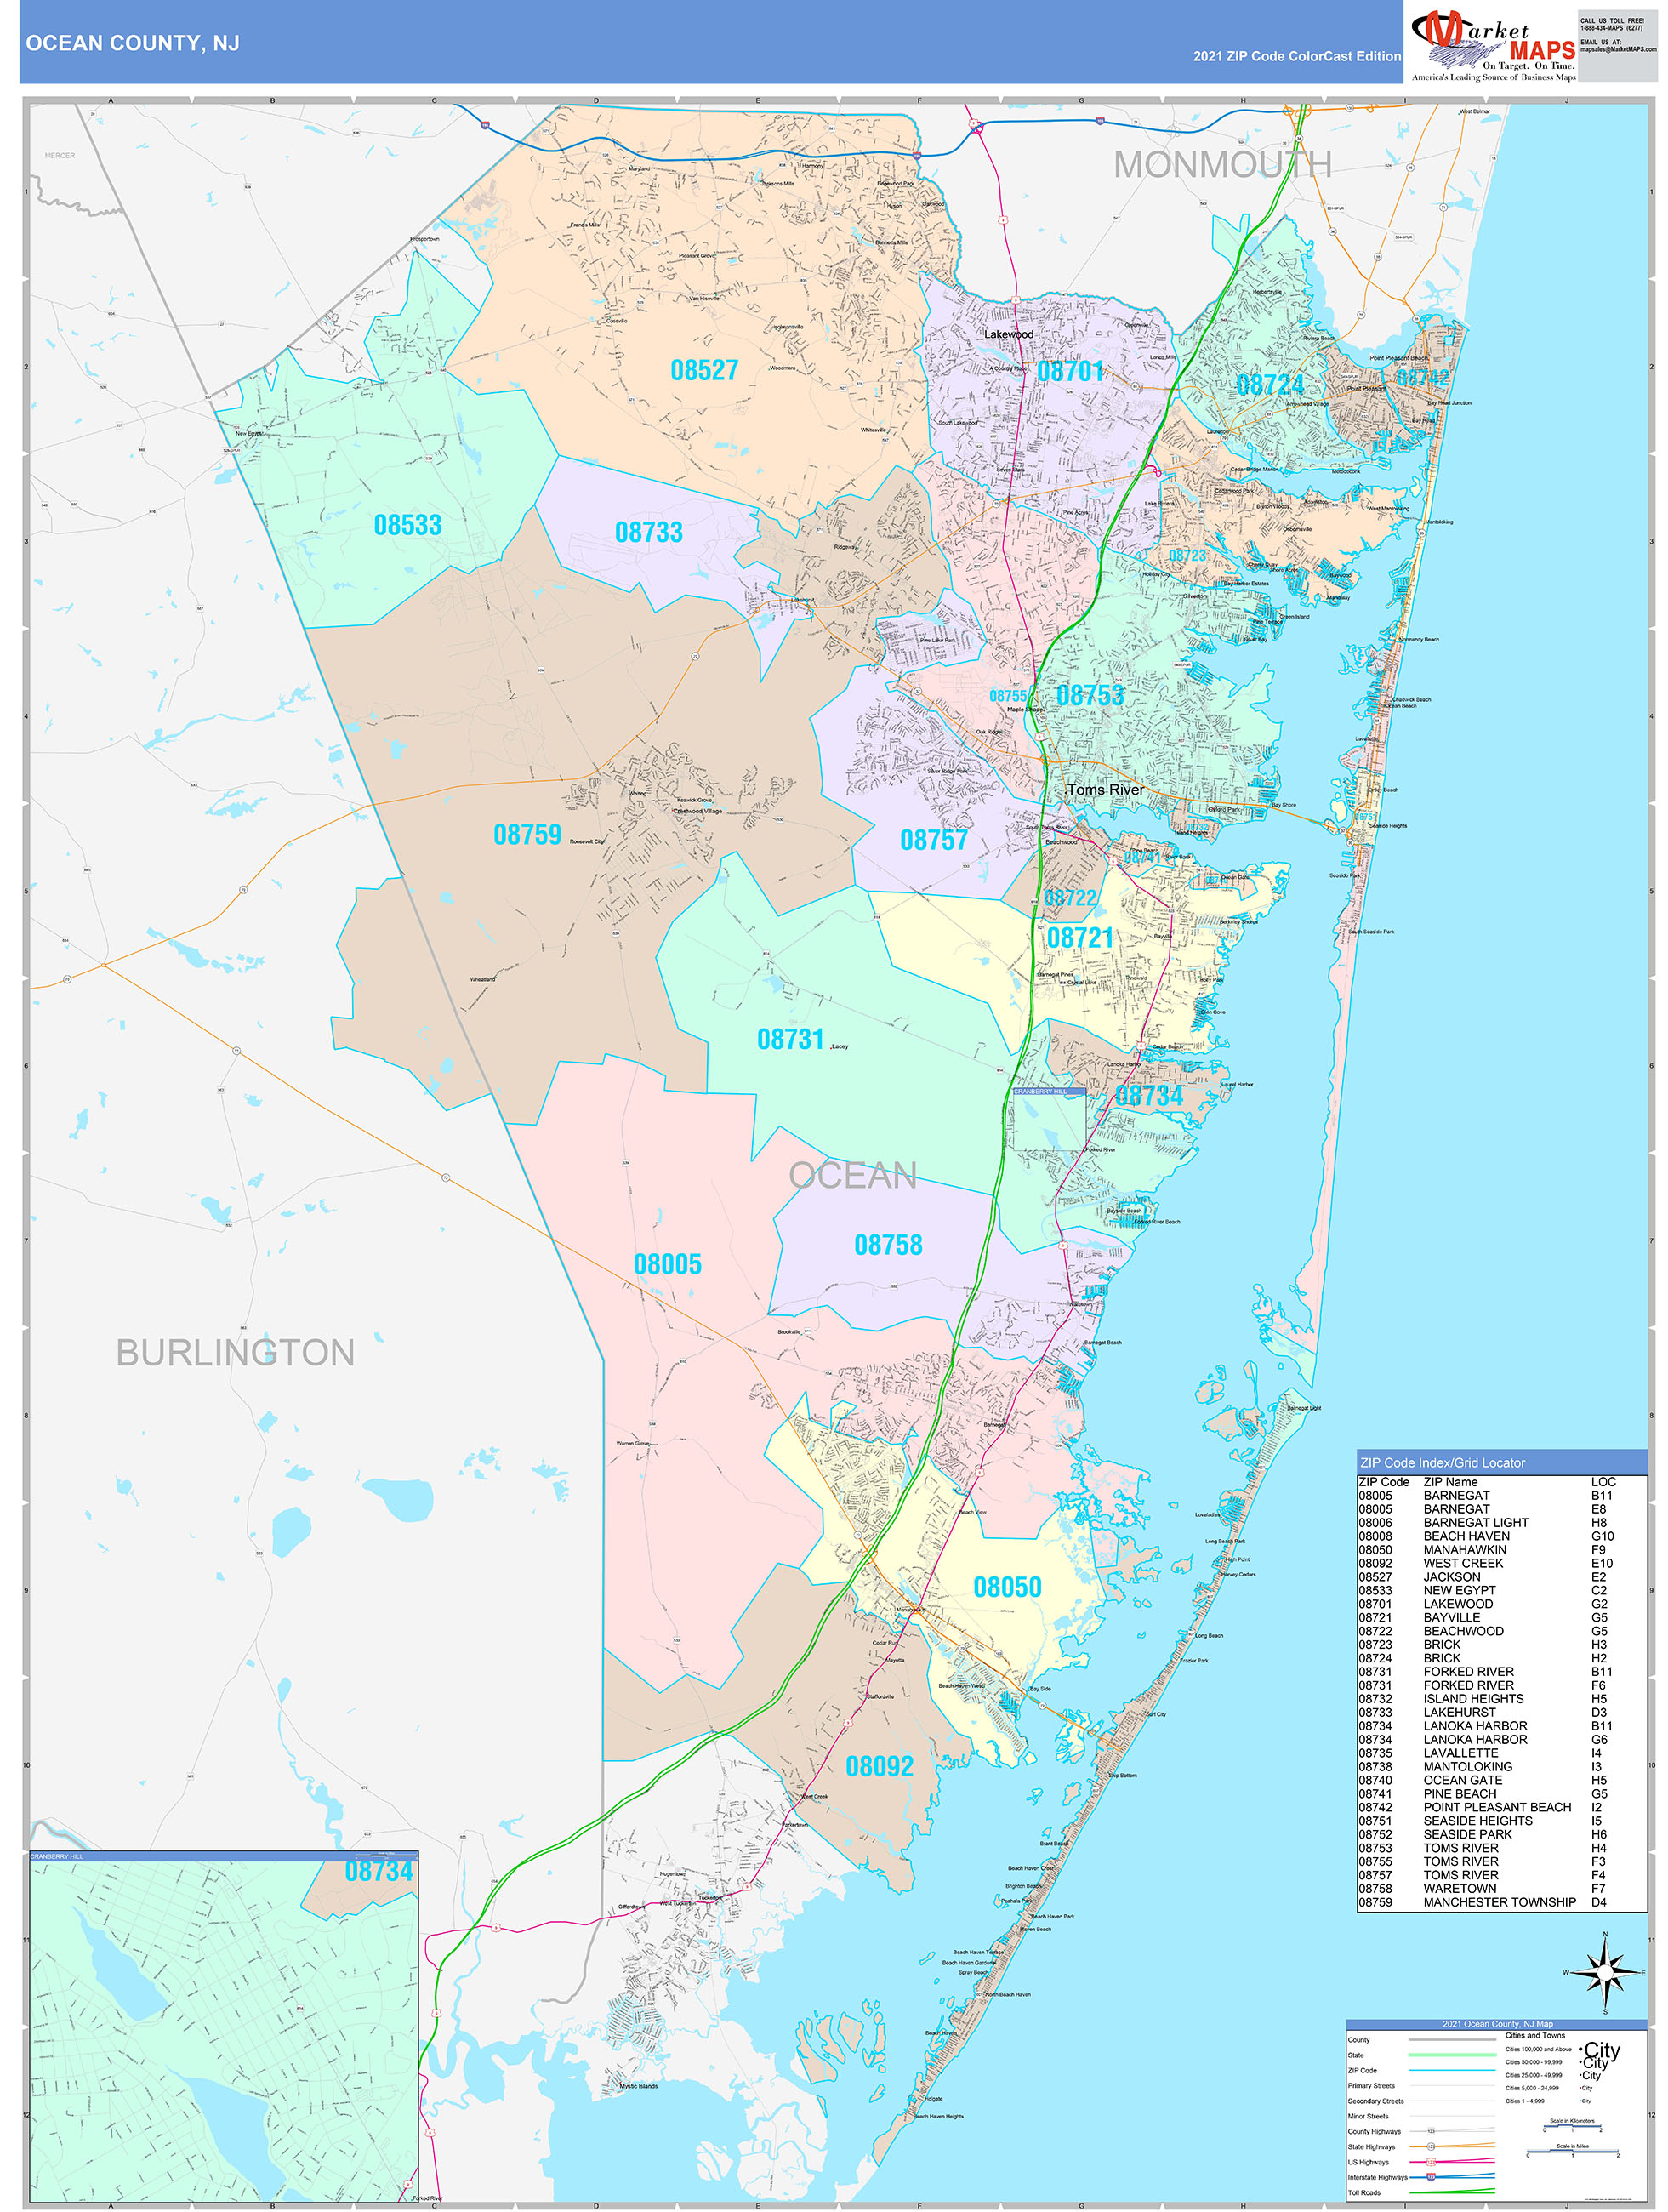 Ocean County, NJ Wall Map Color Cast Style by MarketMAPS - MapSales